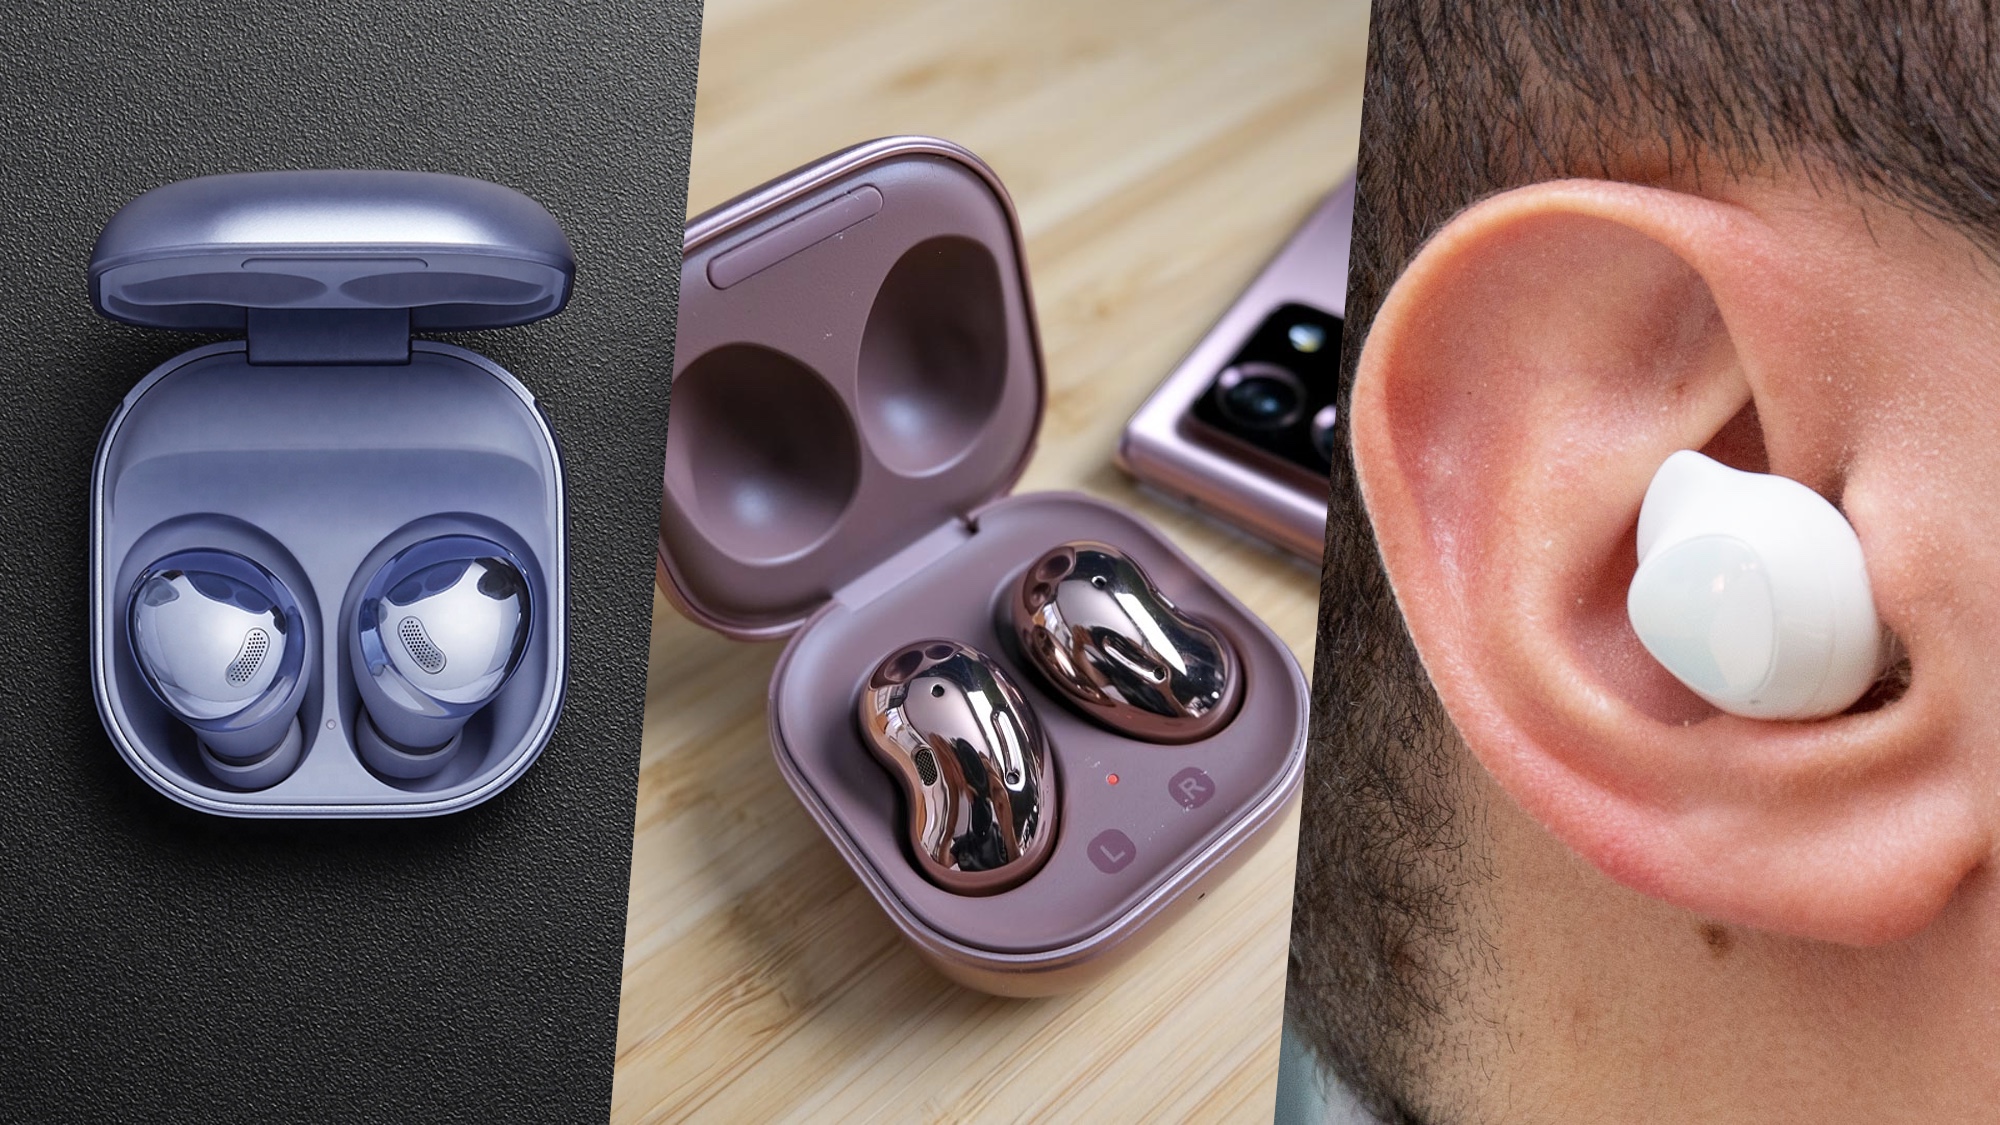 Samsung Galaxy Buds Pro vs Buds Live vs Buds Plus: Which should you get? | Tom's Guide